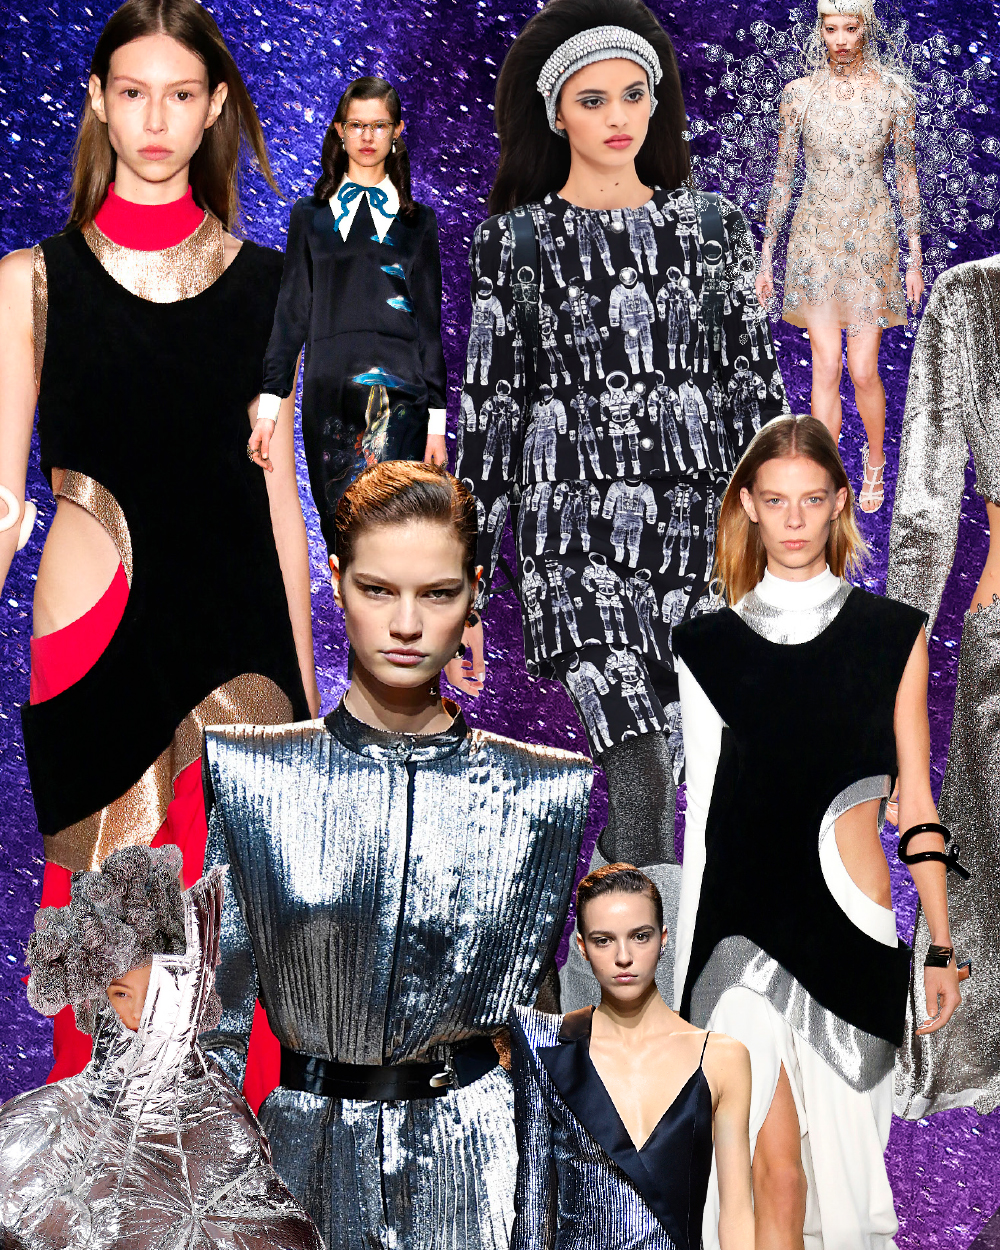 Futuristic fashion: Learn how fashion's obsession with space has